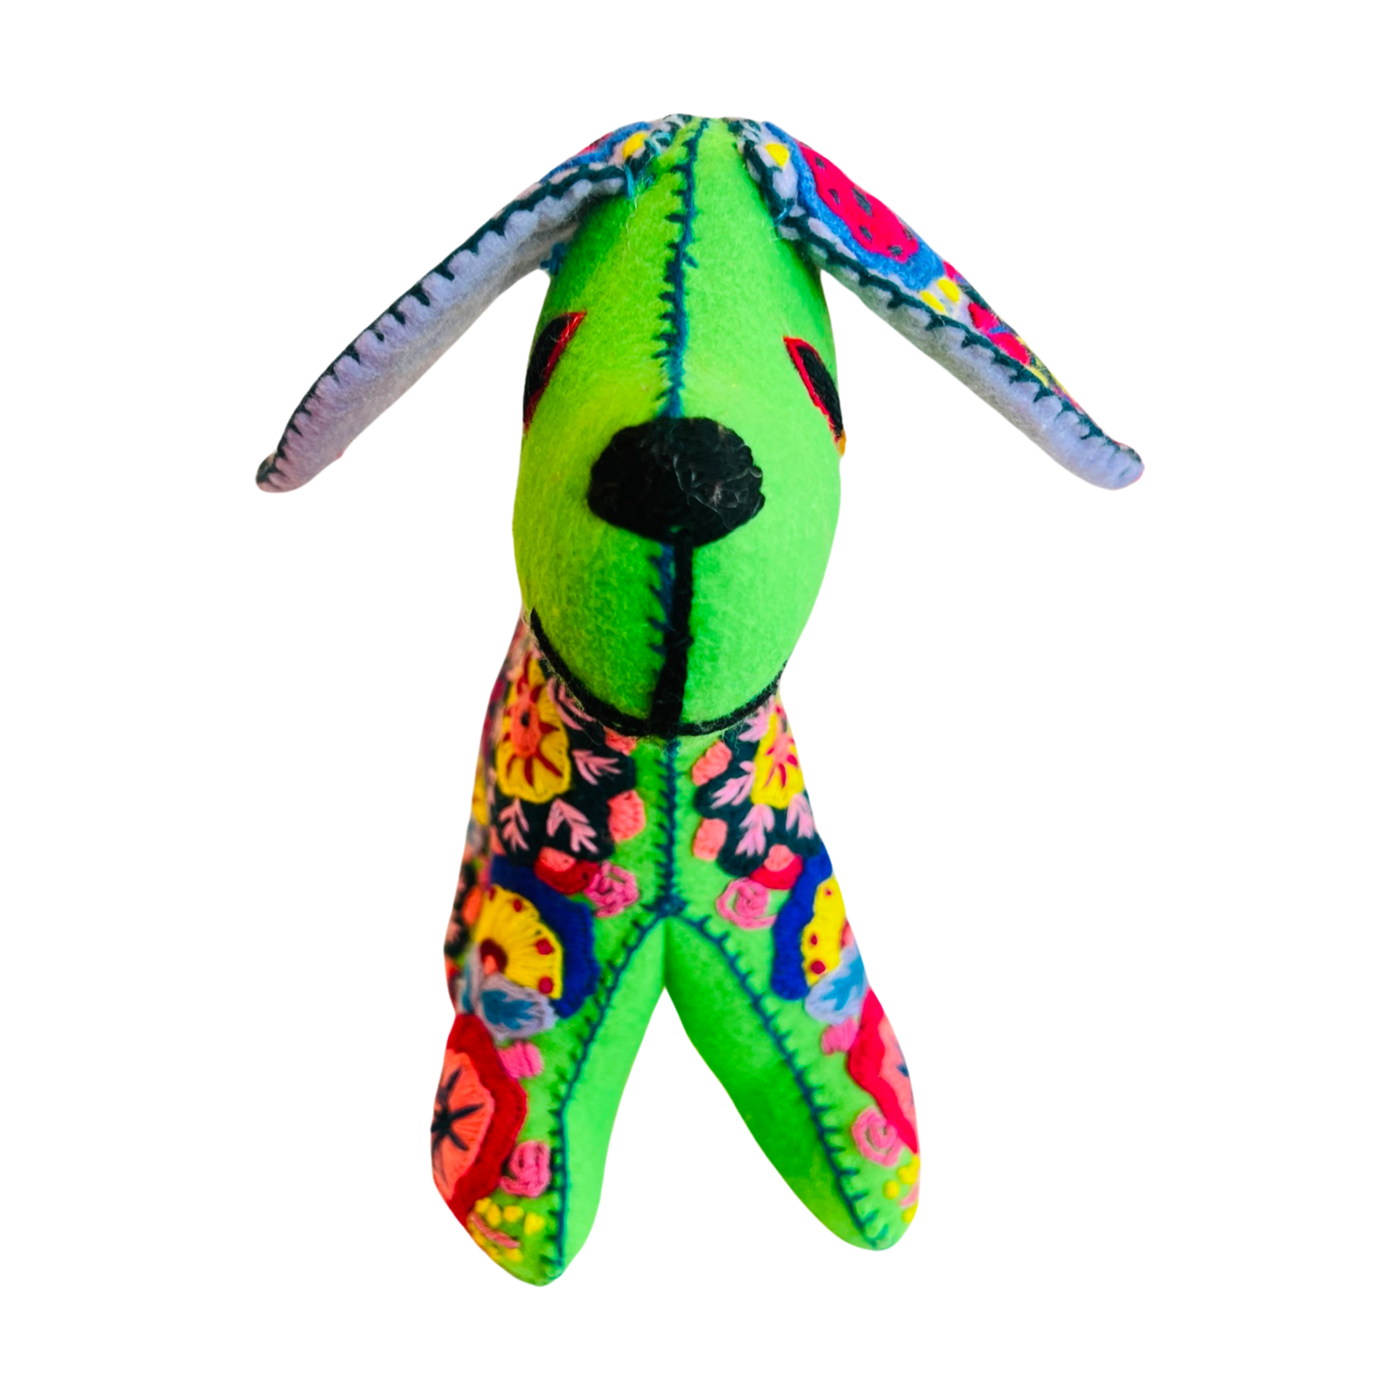 front view of an embroidered green dog with colorful flowers